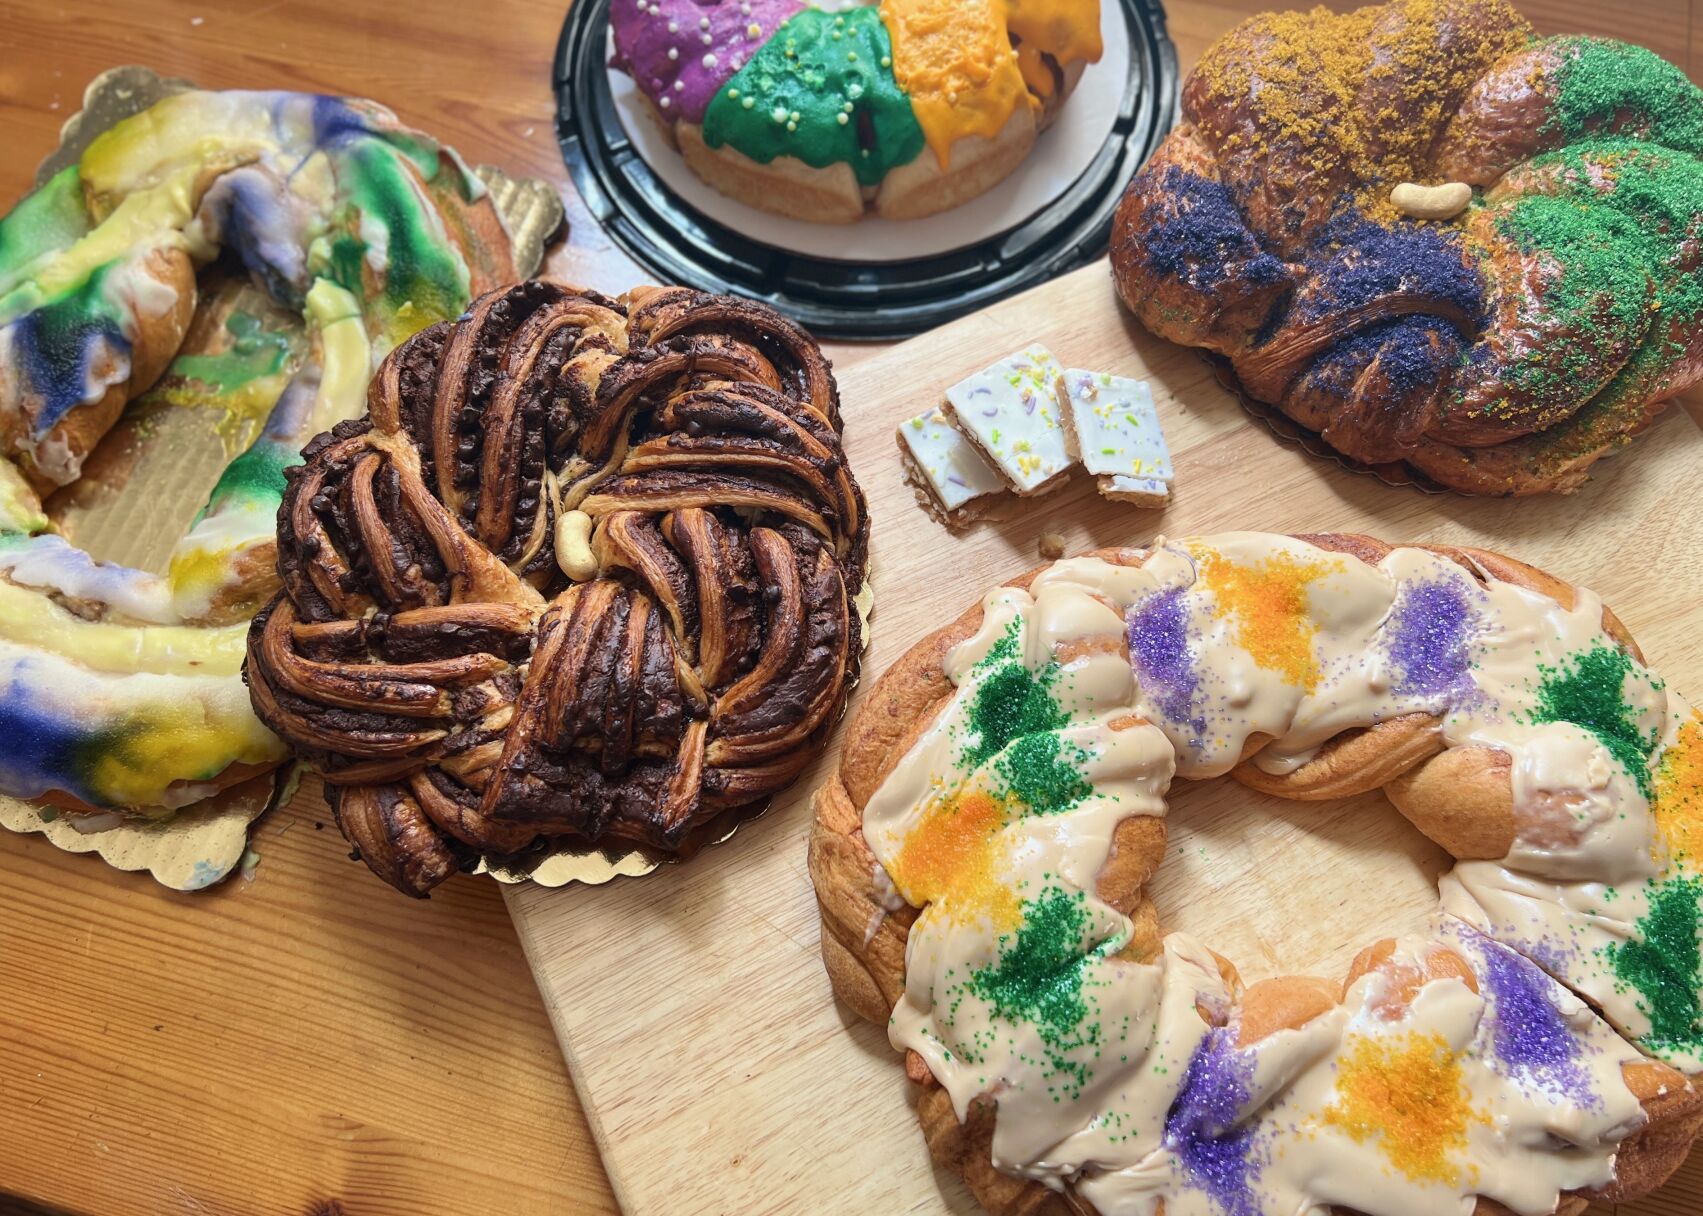 Robért Fresh Market - Our VooDoo King Cake is a Bavarian-cream-filled  brioche topped with chocolate ganache, pecans and shredded coconut. It's  one of our signature cakes and a highlight of Mardi Gras